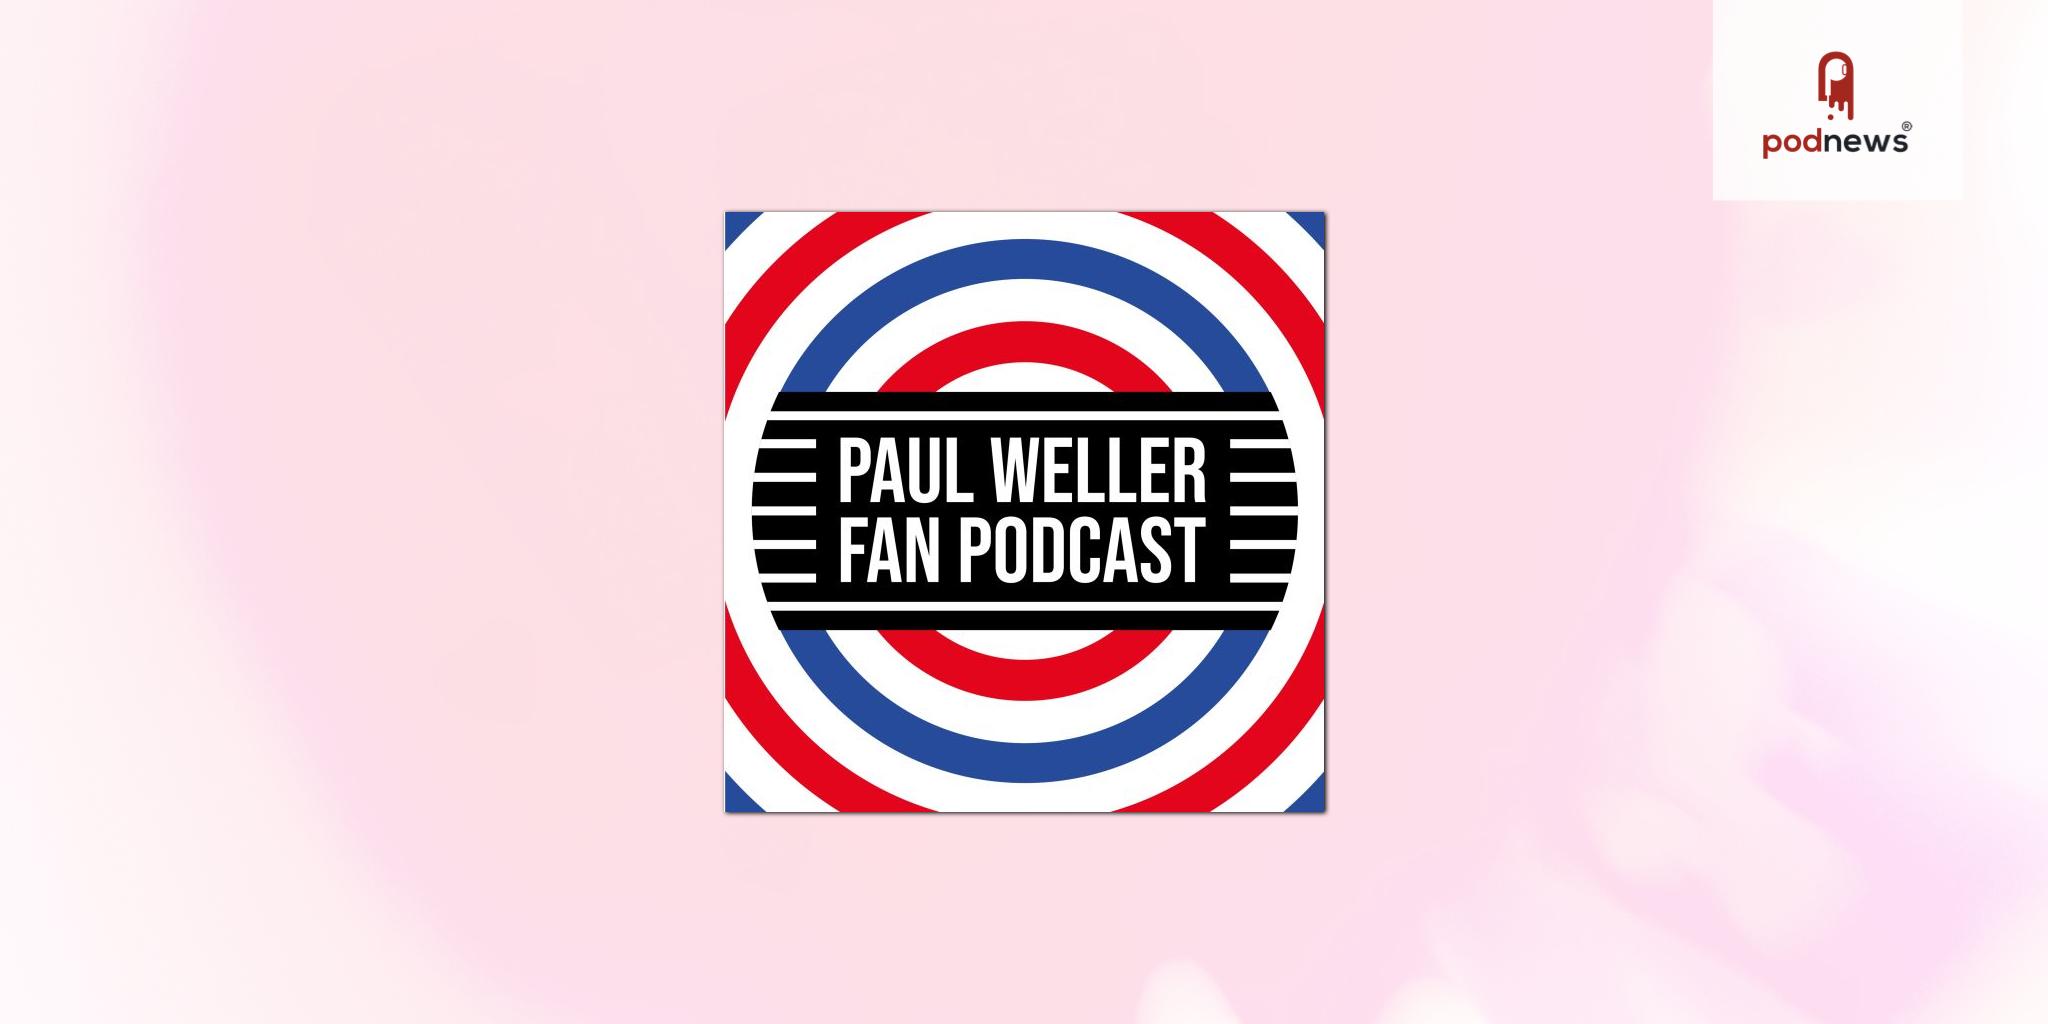 Desperately Seeking Paul Podcast Concludes After Three Years of Unveiling Paul Weller's Musical Journey